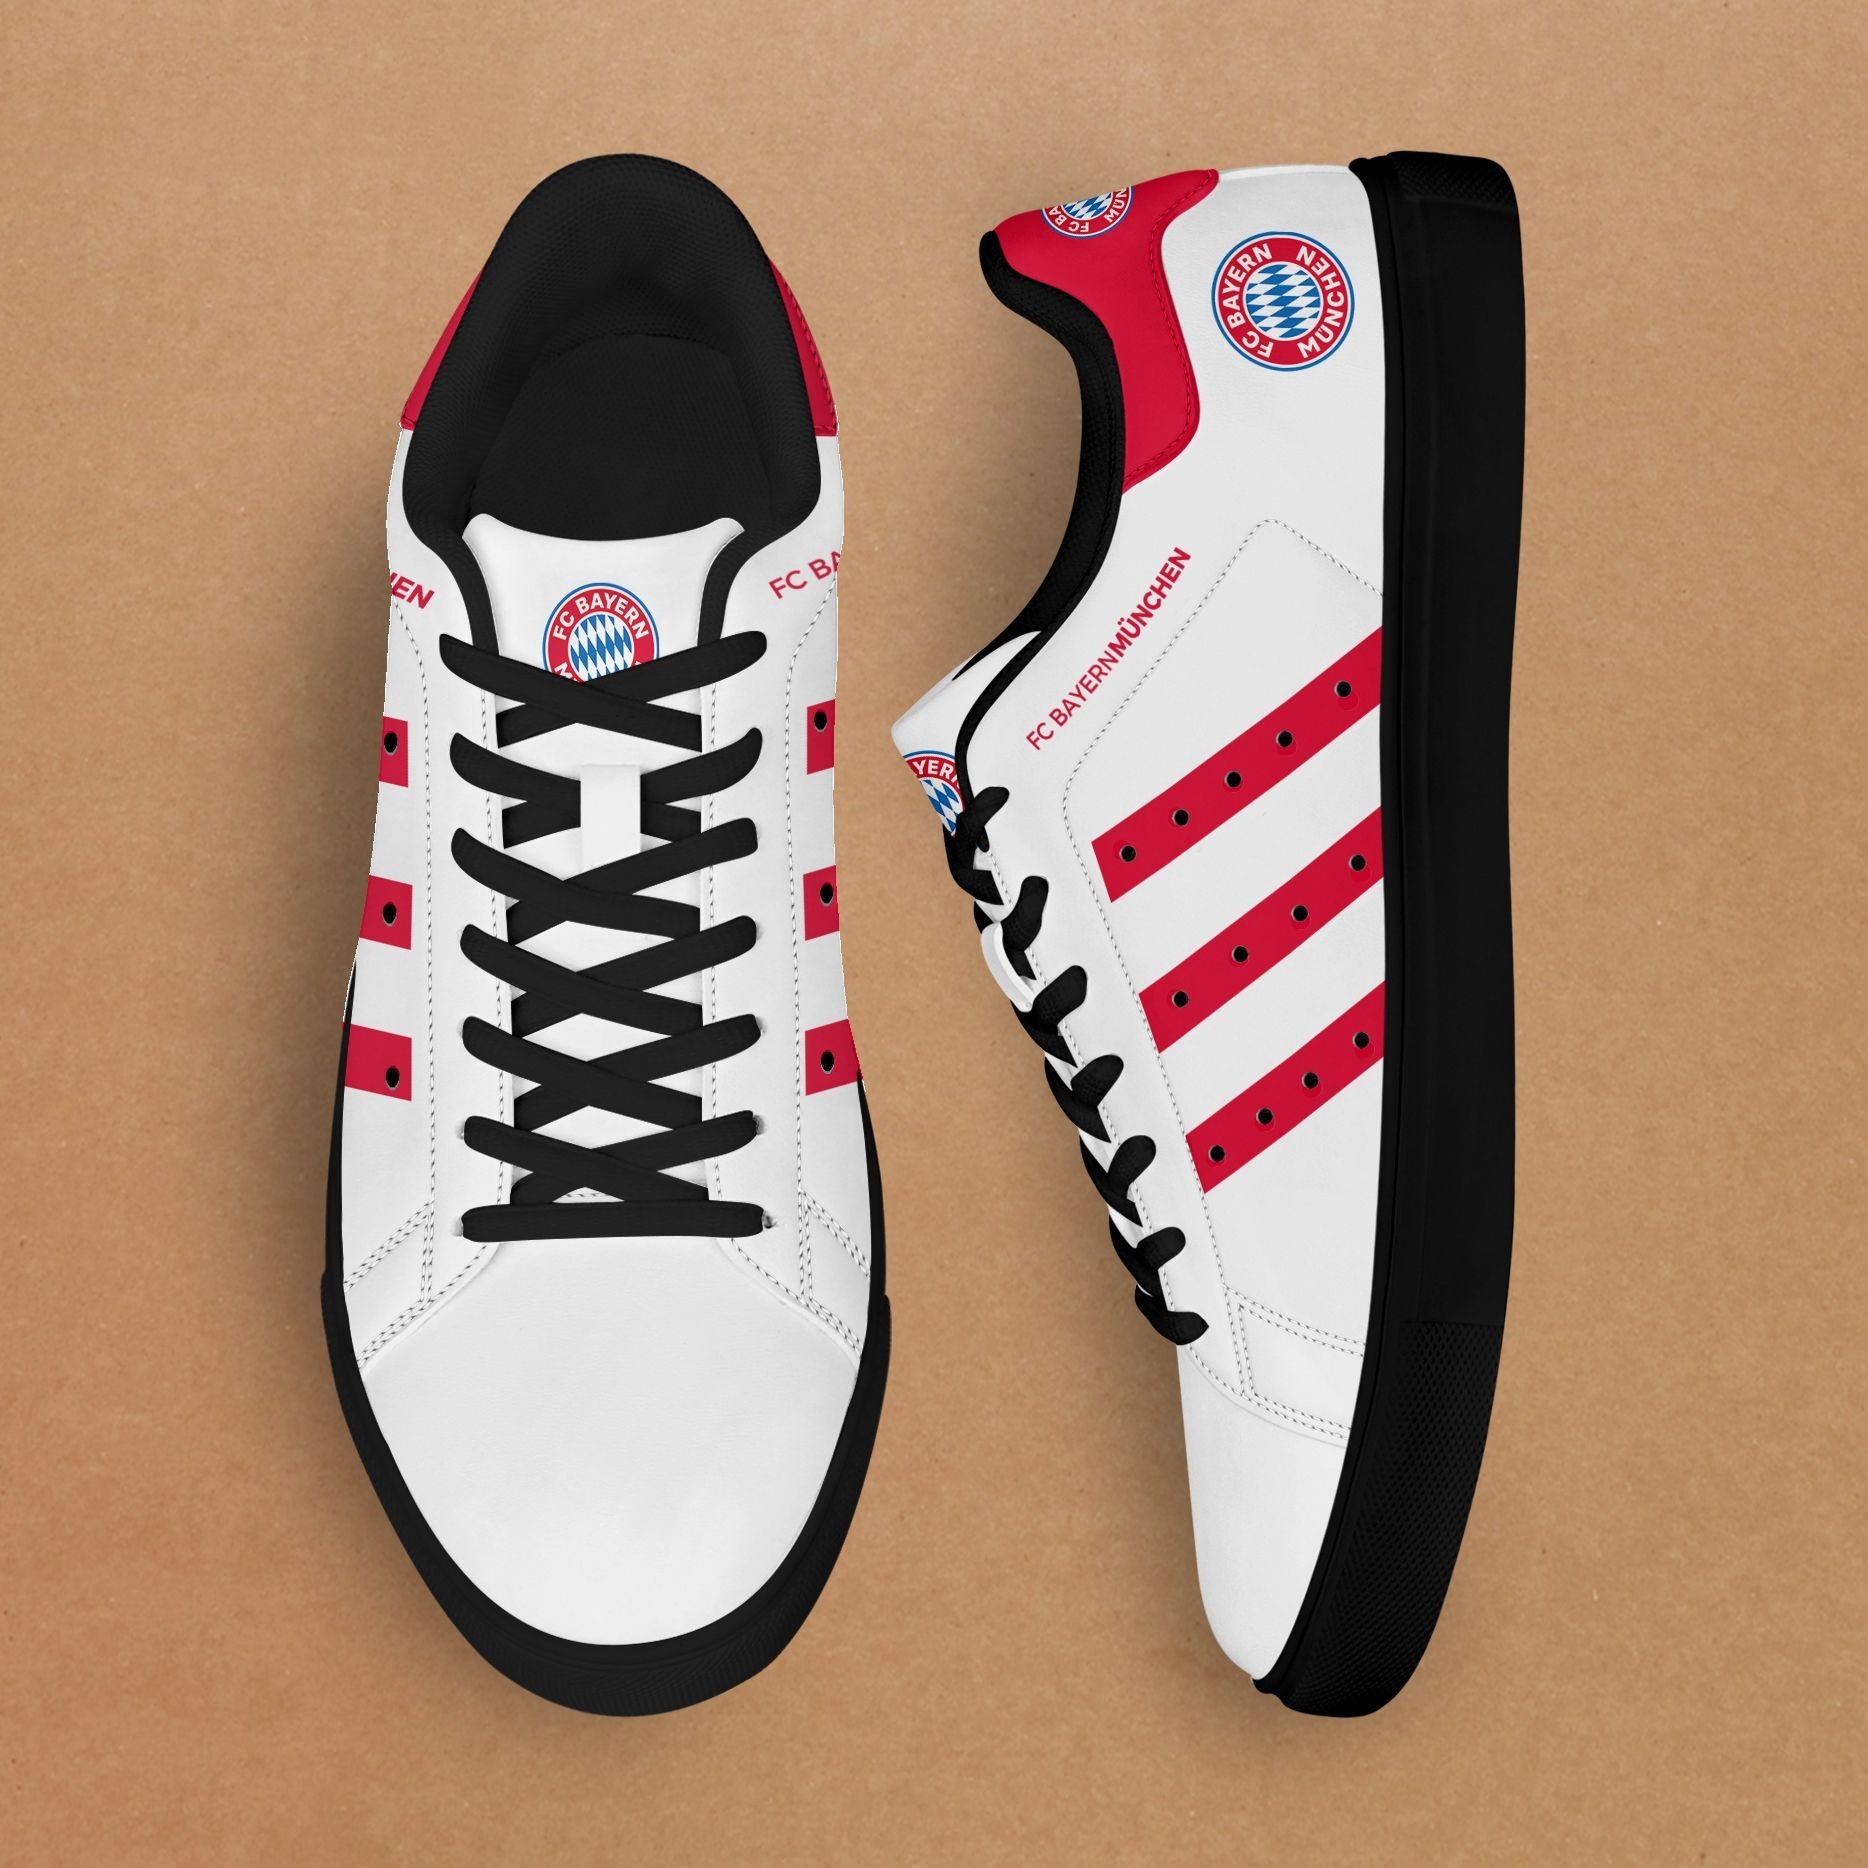 Bayern Munchen stan smith shoes - Picture 2